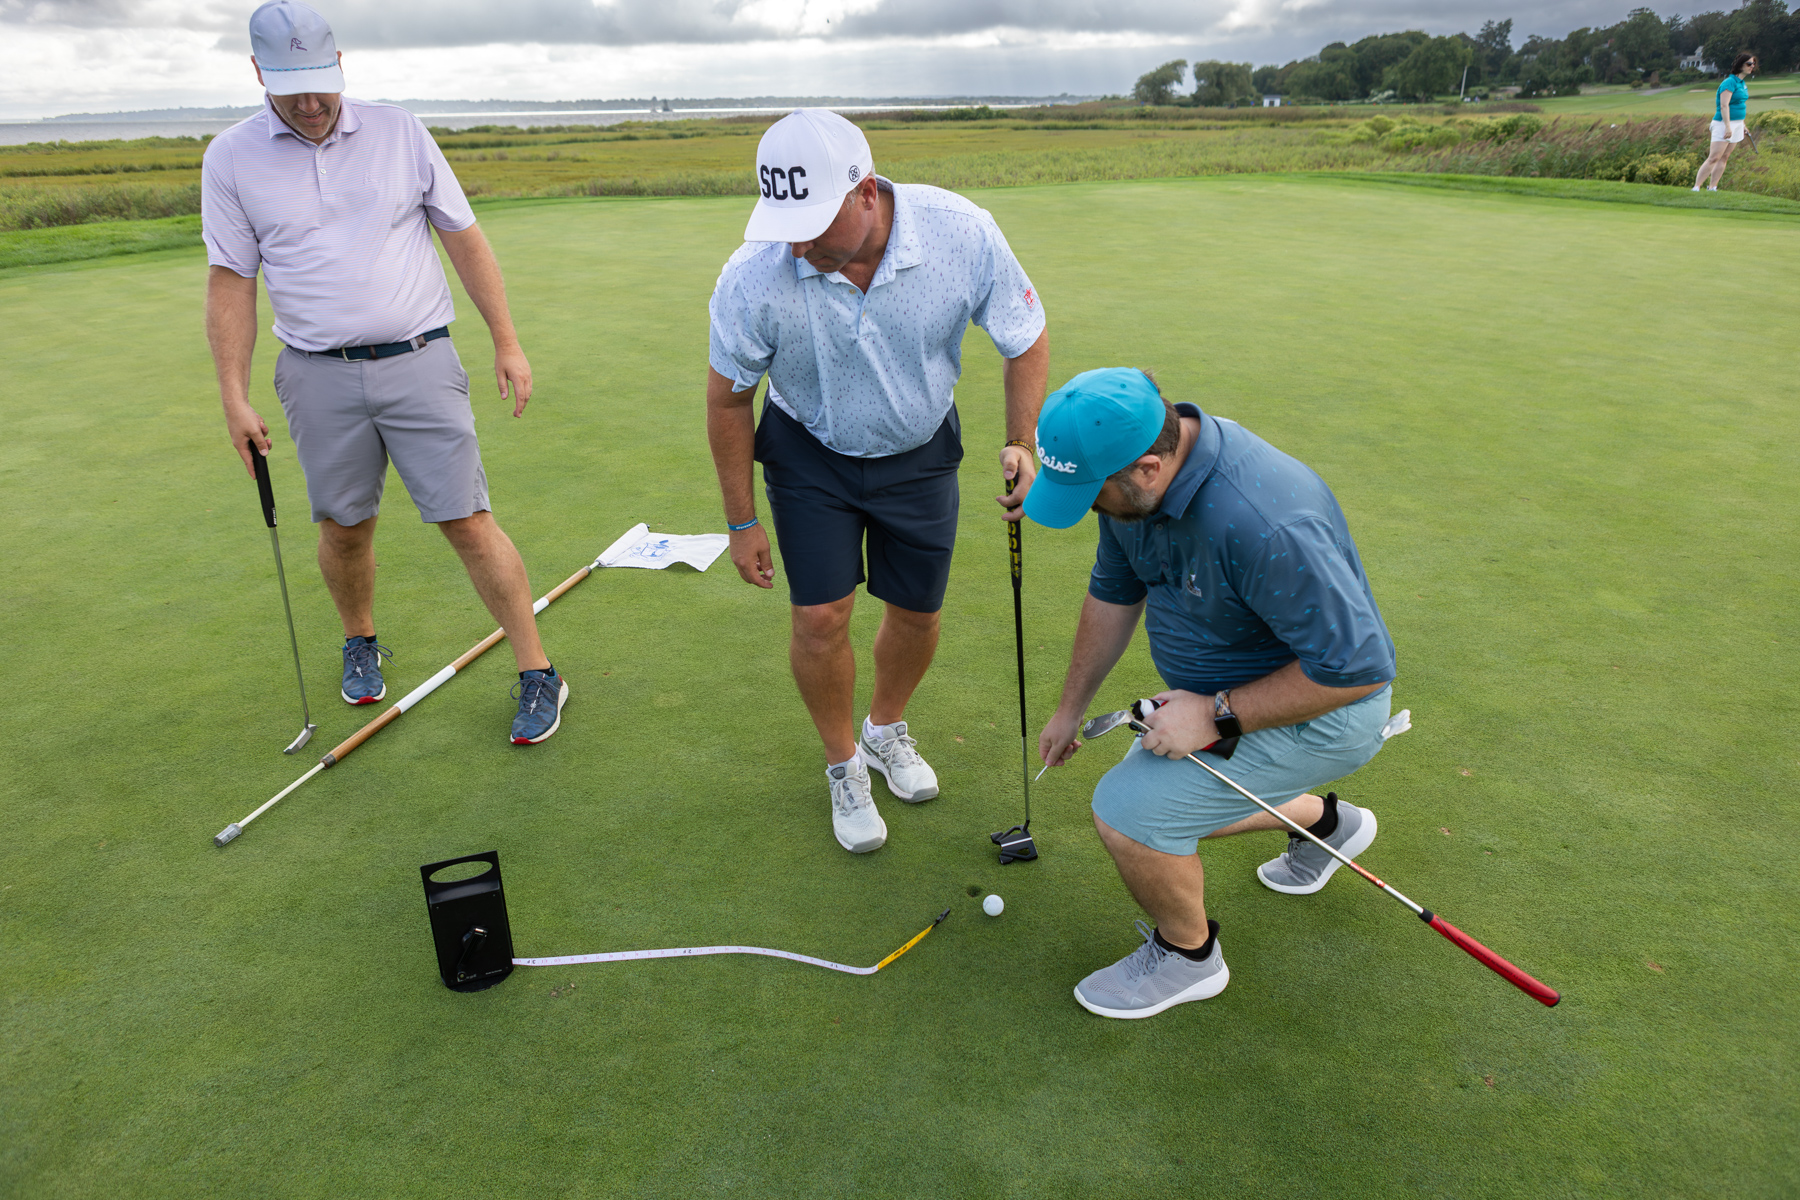 Golfers measuring distance to hole